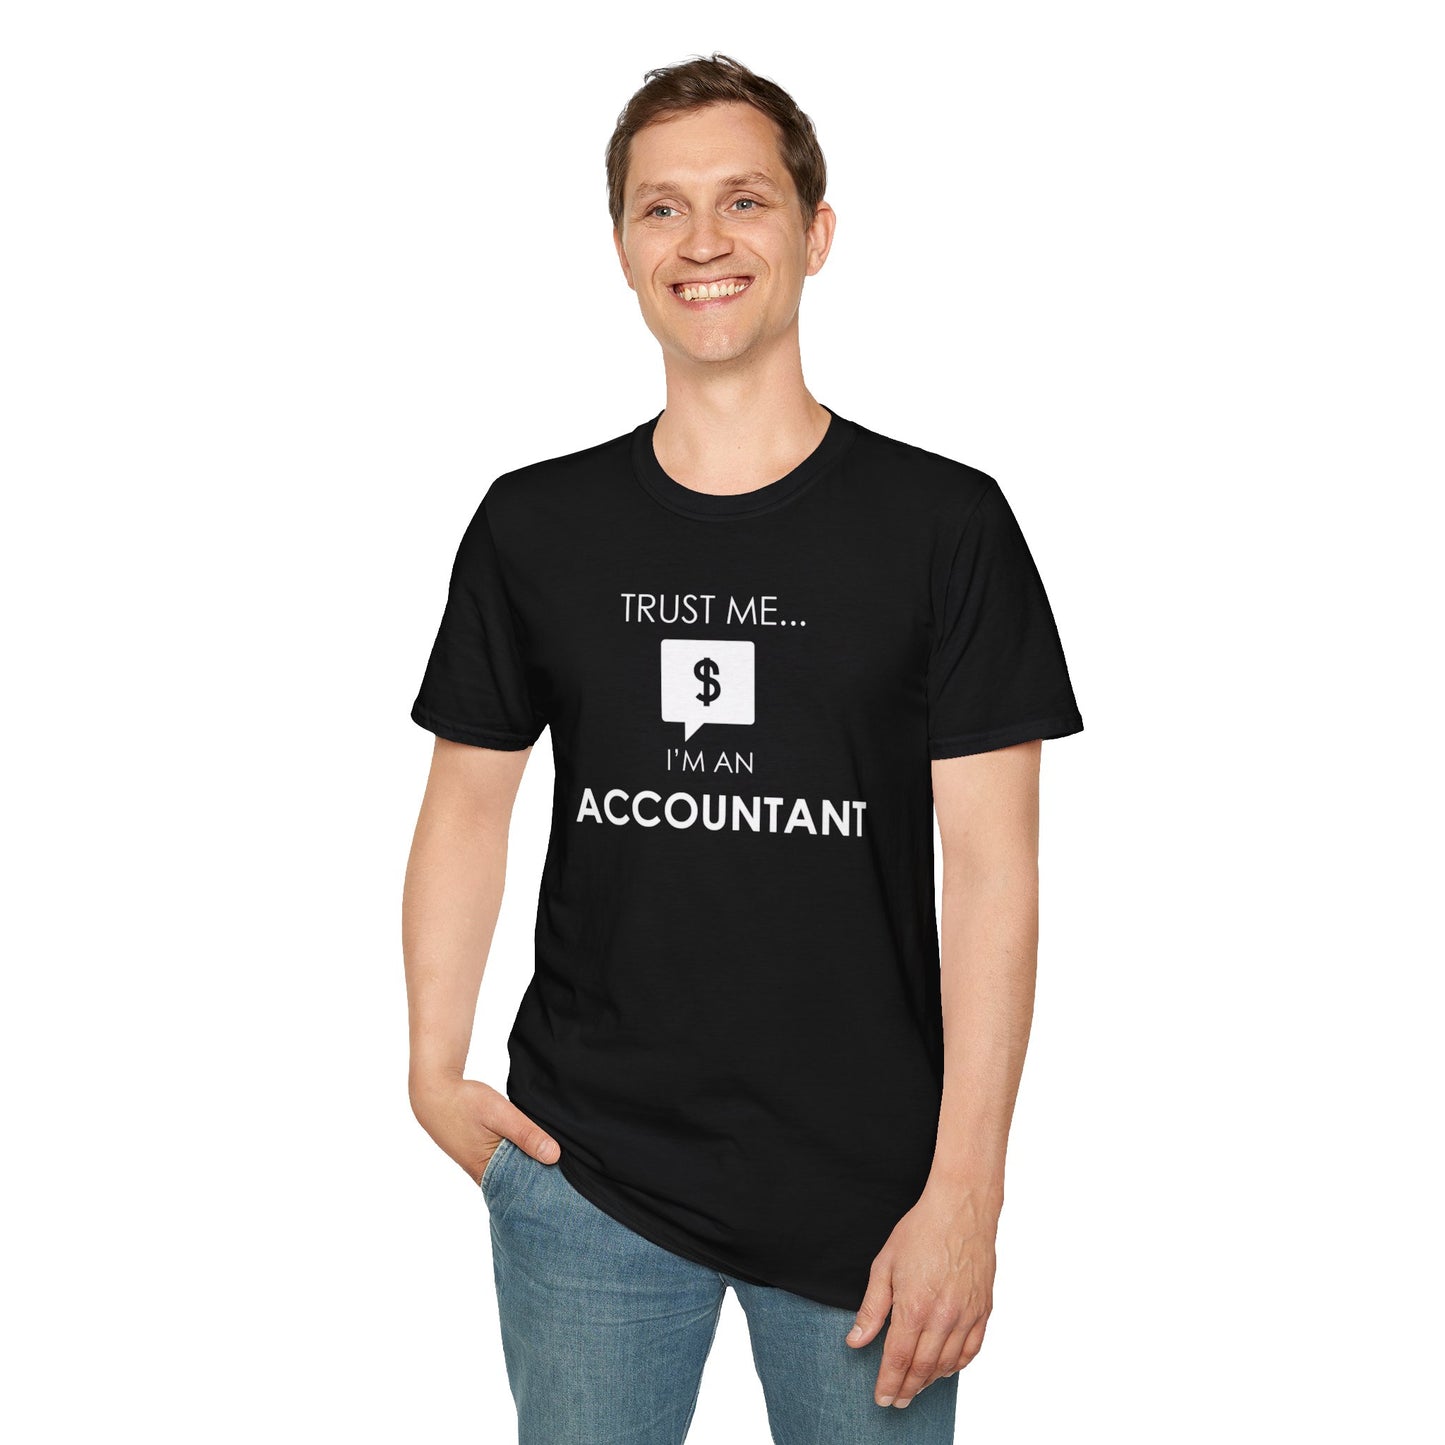 Trust Me, I'm An Accountant T-Shirts - Perfect Gift for Finance Pros!